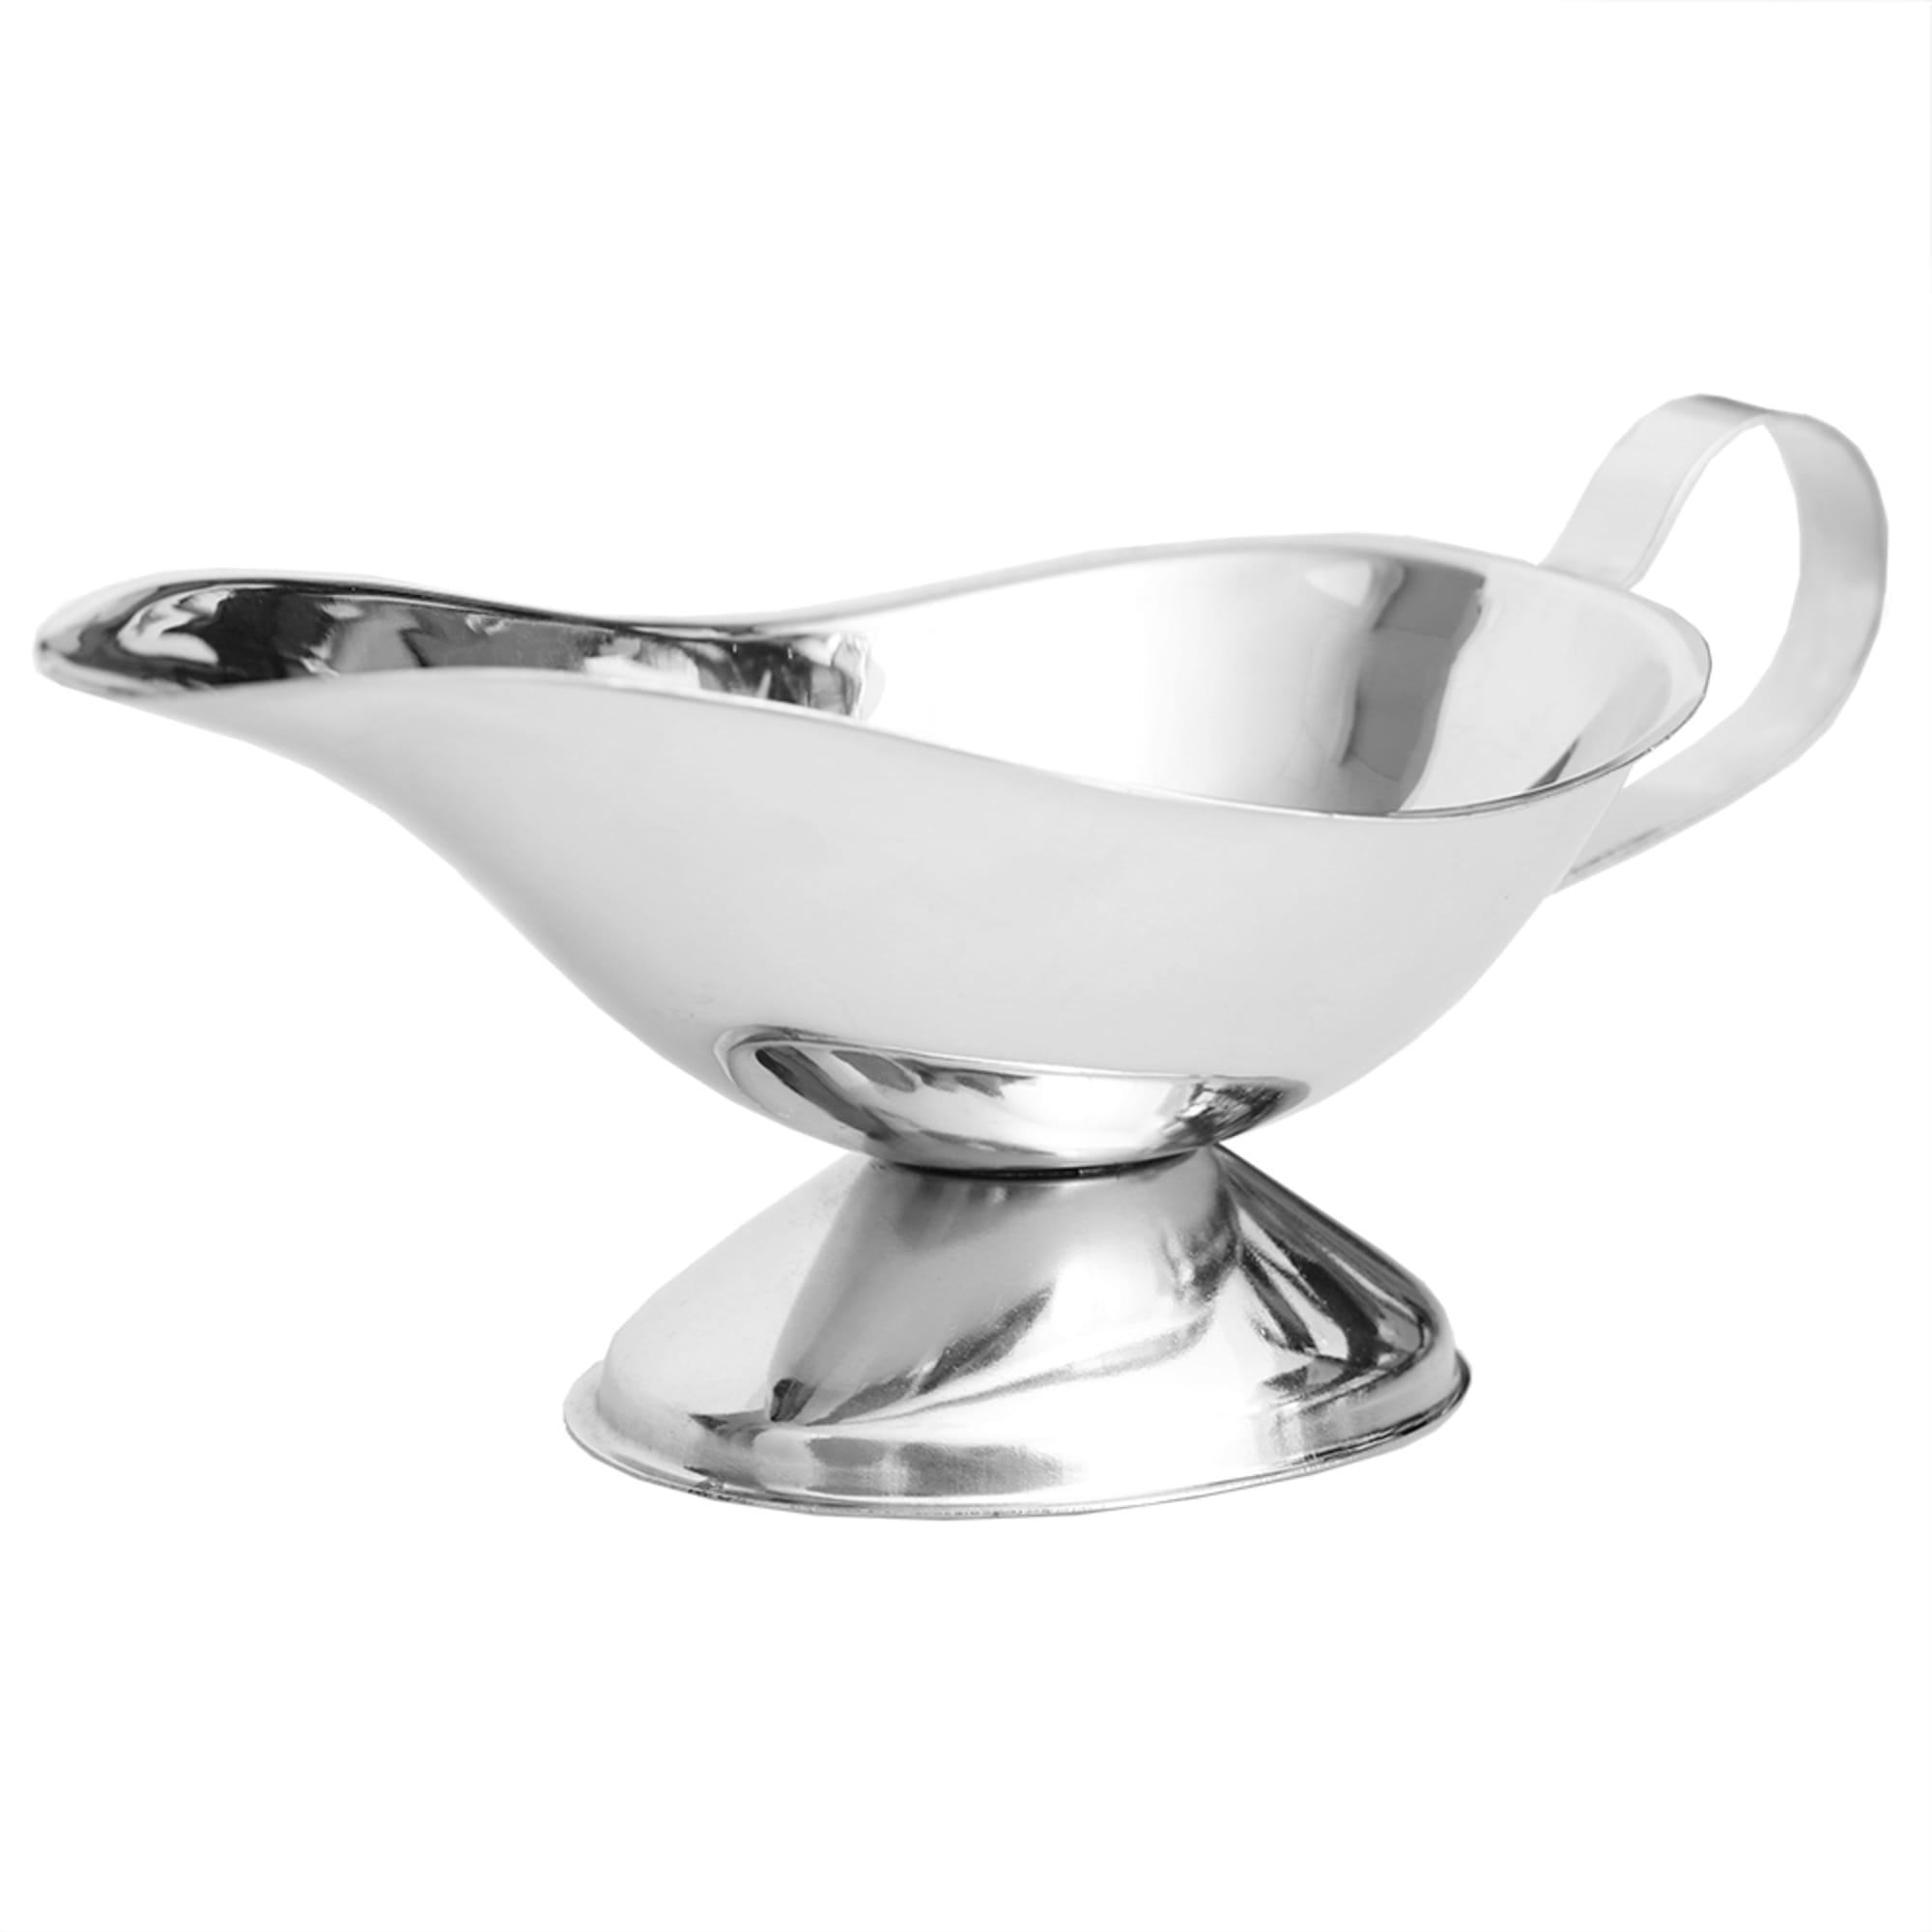 Home Basics Large Capacity Stainless Steel Gravy Boat, Silver $5.00 EACH, CASE PACK OF 12